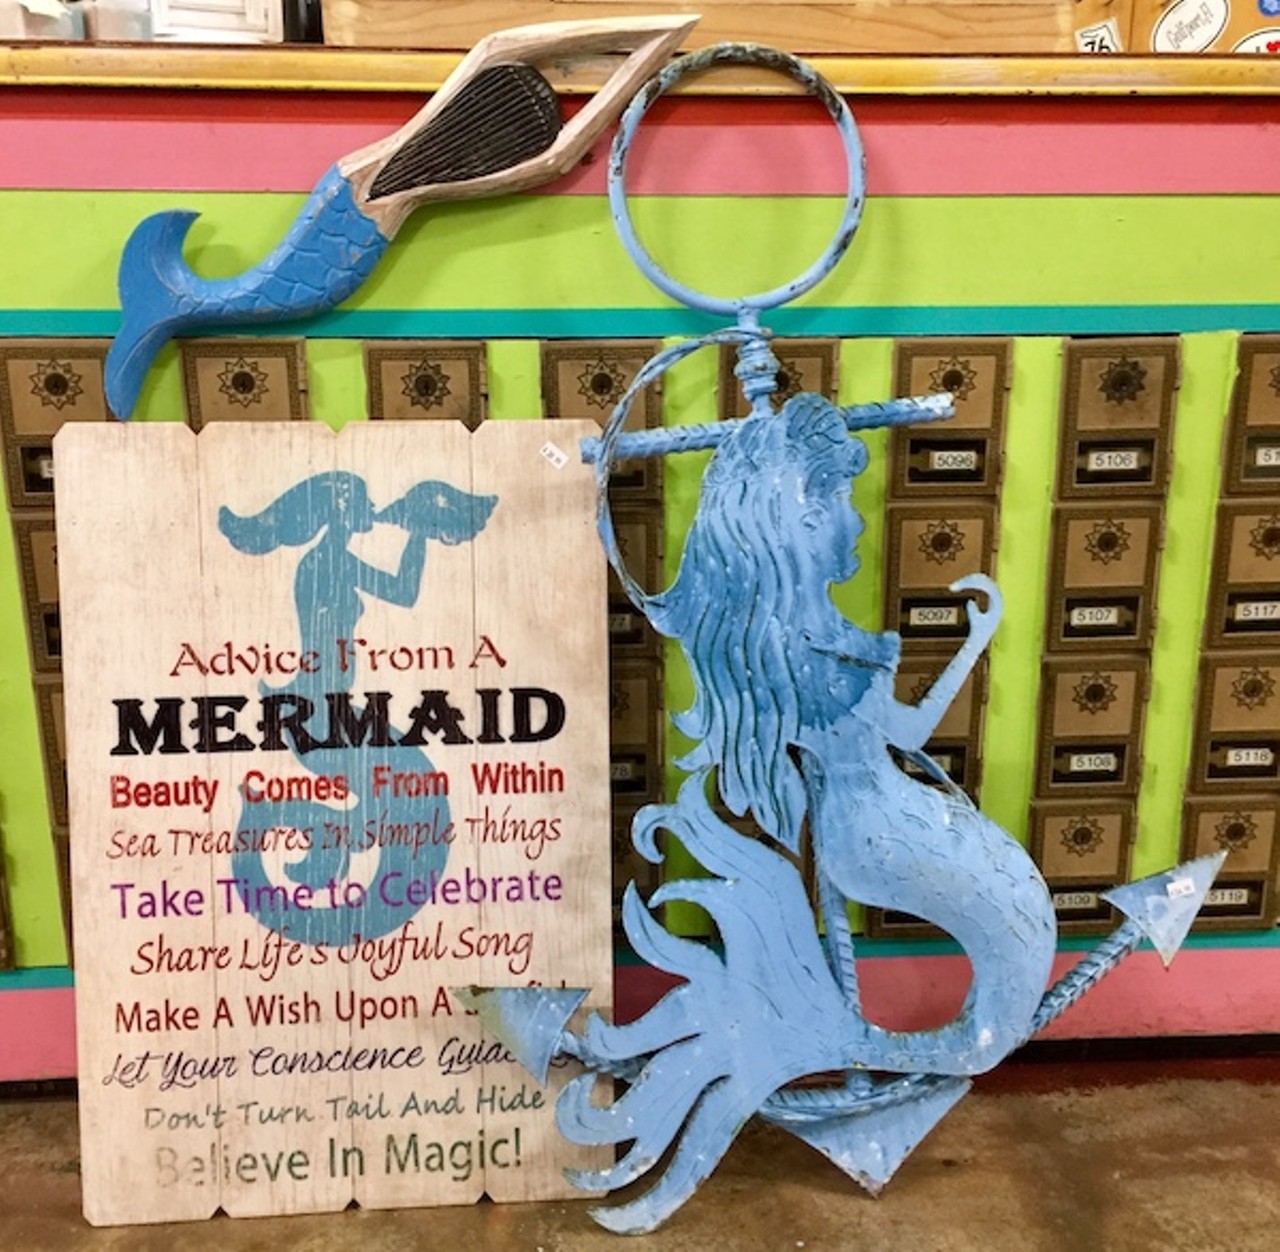 N is for nautical ephemera at the Gulfport Beach Bazaar
This general-store-meets-artsy-stuff vendor-driven shop has more than its fair share of shells, sea glass and nautical ephemera.
Who to gift: Anyone on your list with a boat.
What to gift: We&#146;re partial to their mermaid-related merch, but you do you.
Photo via Gini Fagan, Gulfport Beach Bazaar